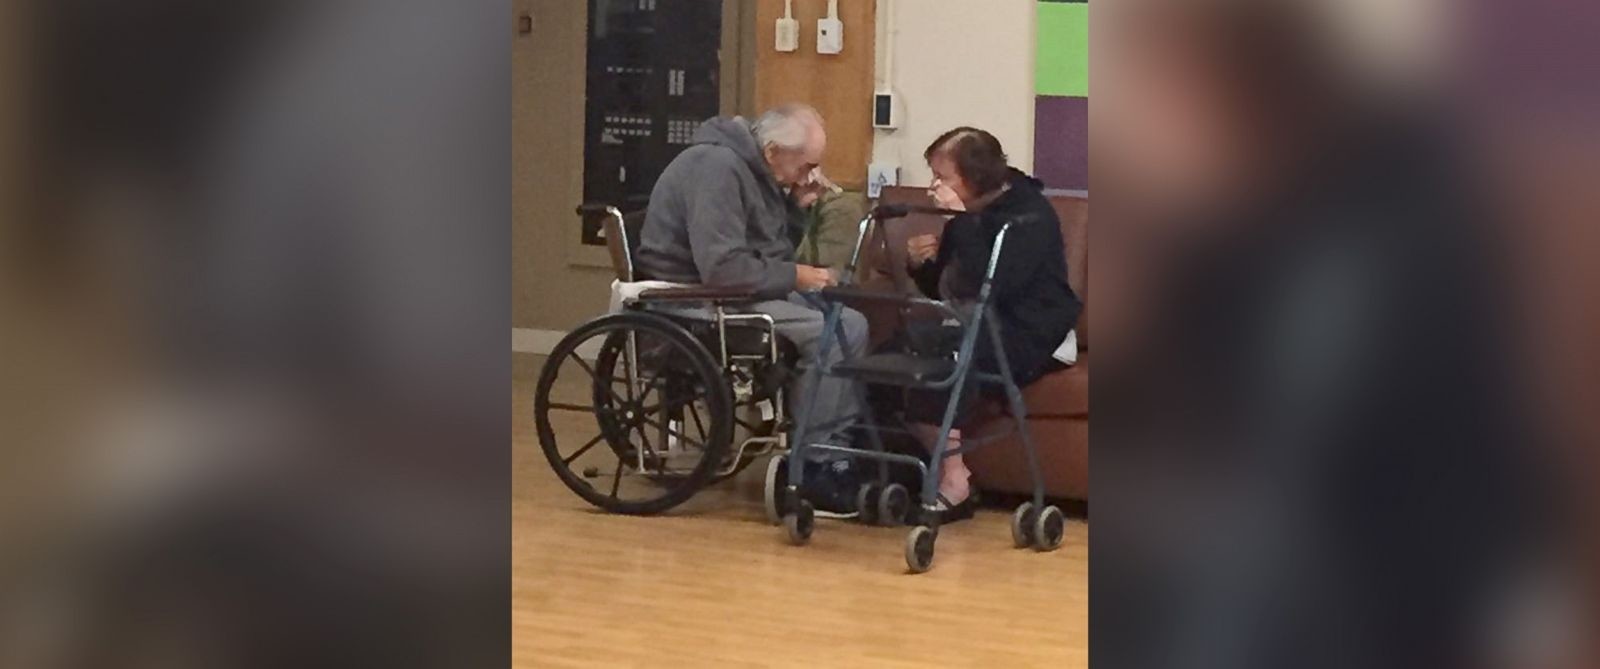 The couple, who are in their 80s, were separated into two different care homes a half an hour apart after 62 years of marriage because no beds were available together. (AP Photo provided by Ashley Bartyik)